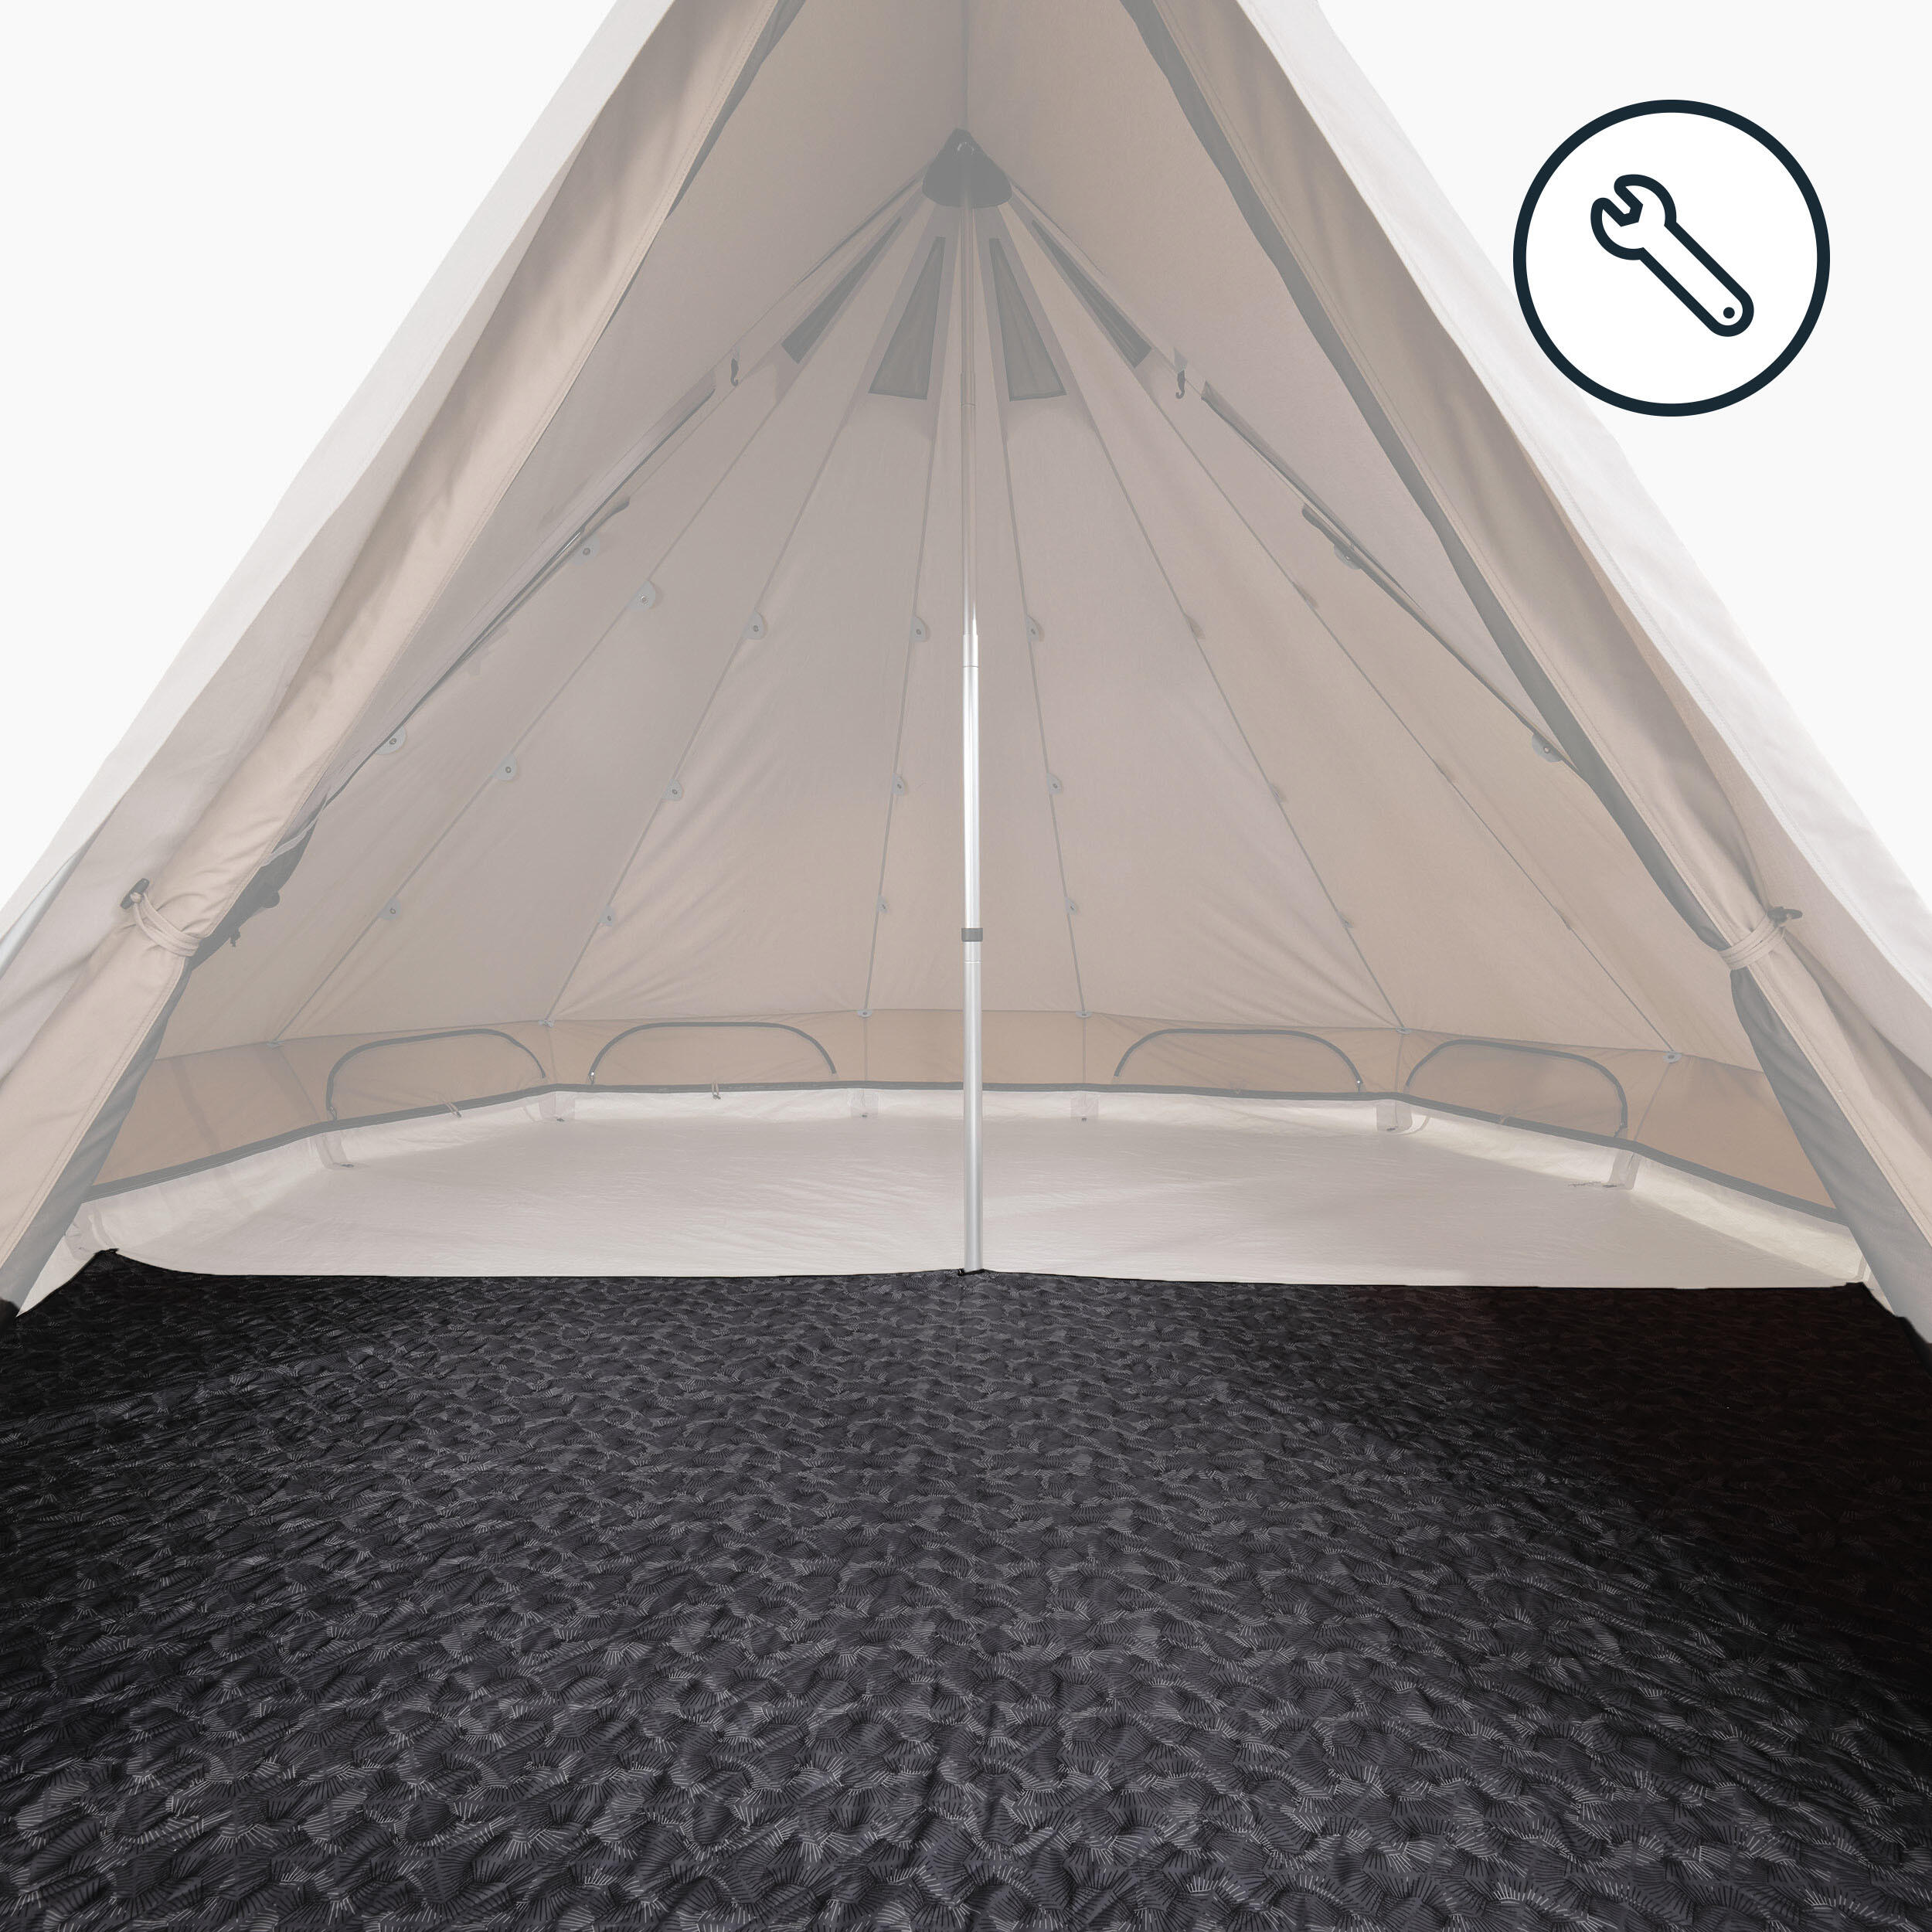 RUG - SPARE PART FOR THE TIPI 5.2 POLYCOTTON TENT 1/1